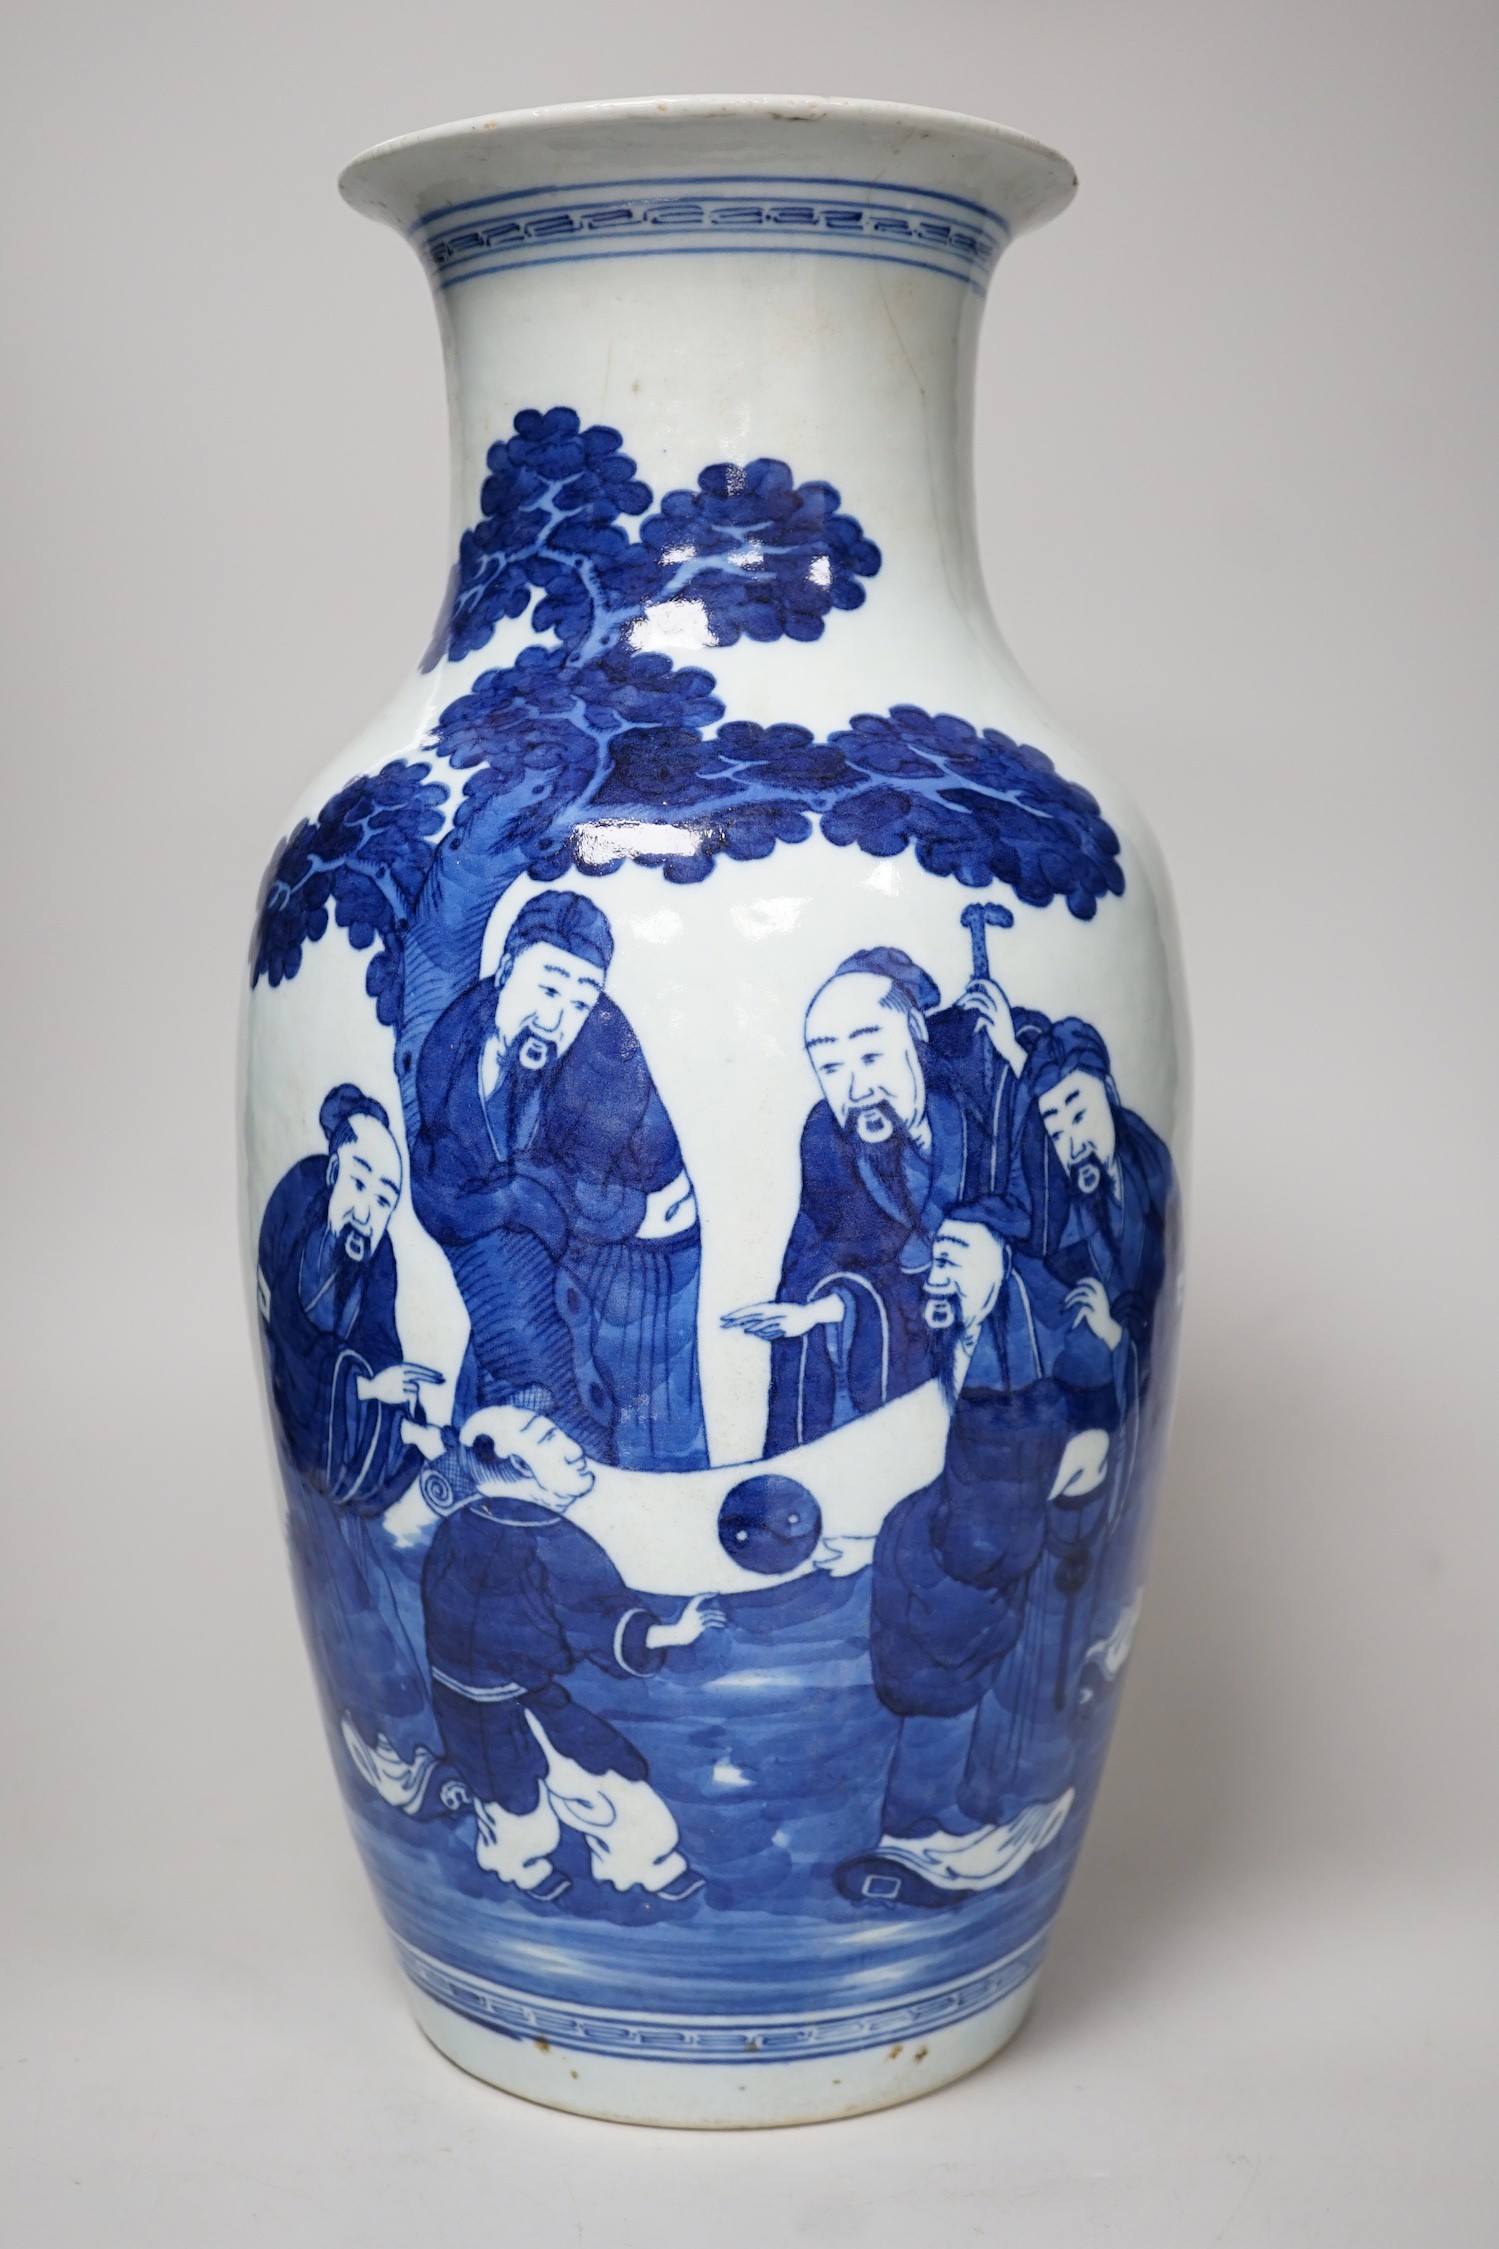 A large Chinese blue and white export vase, decorated with sages and attendants reviewing a